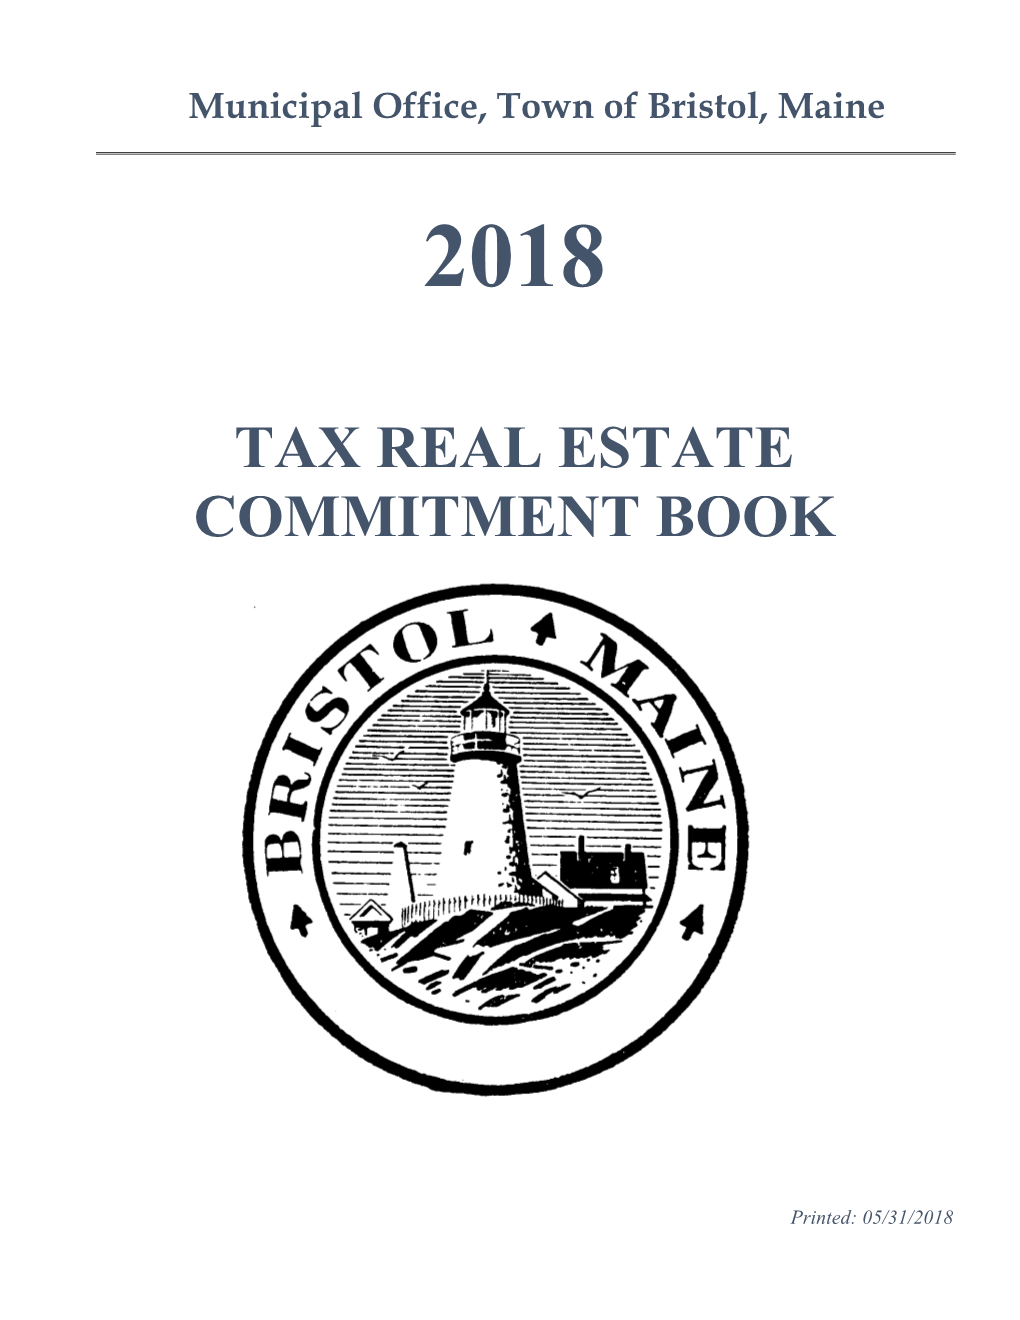 Tax Real Estate Commitment Book